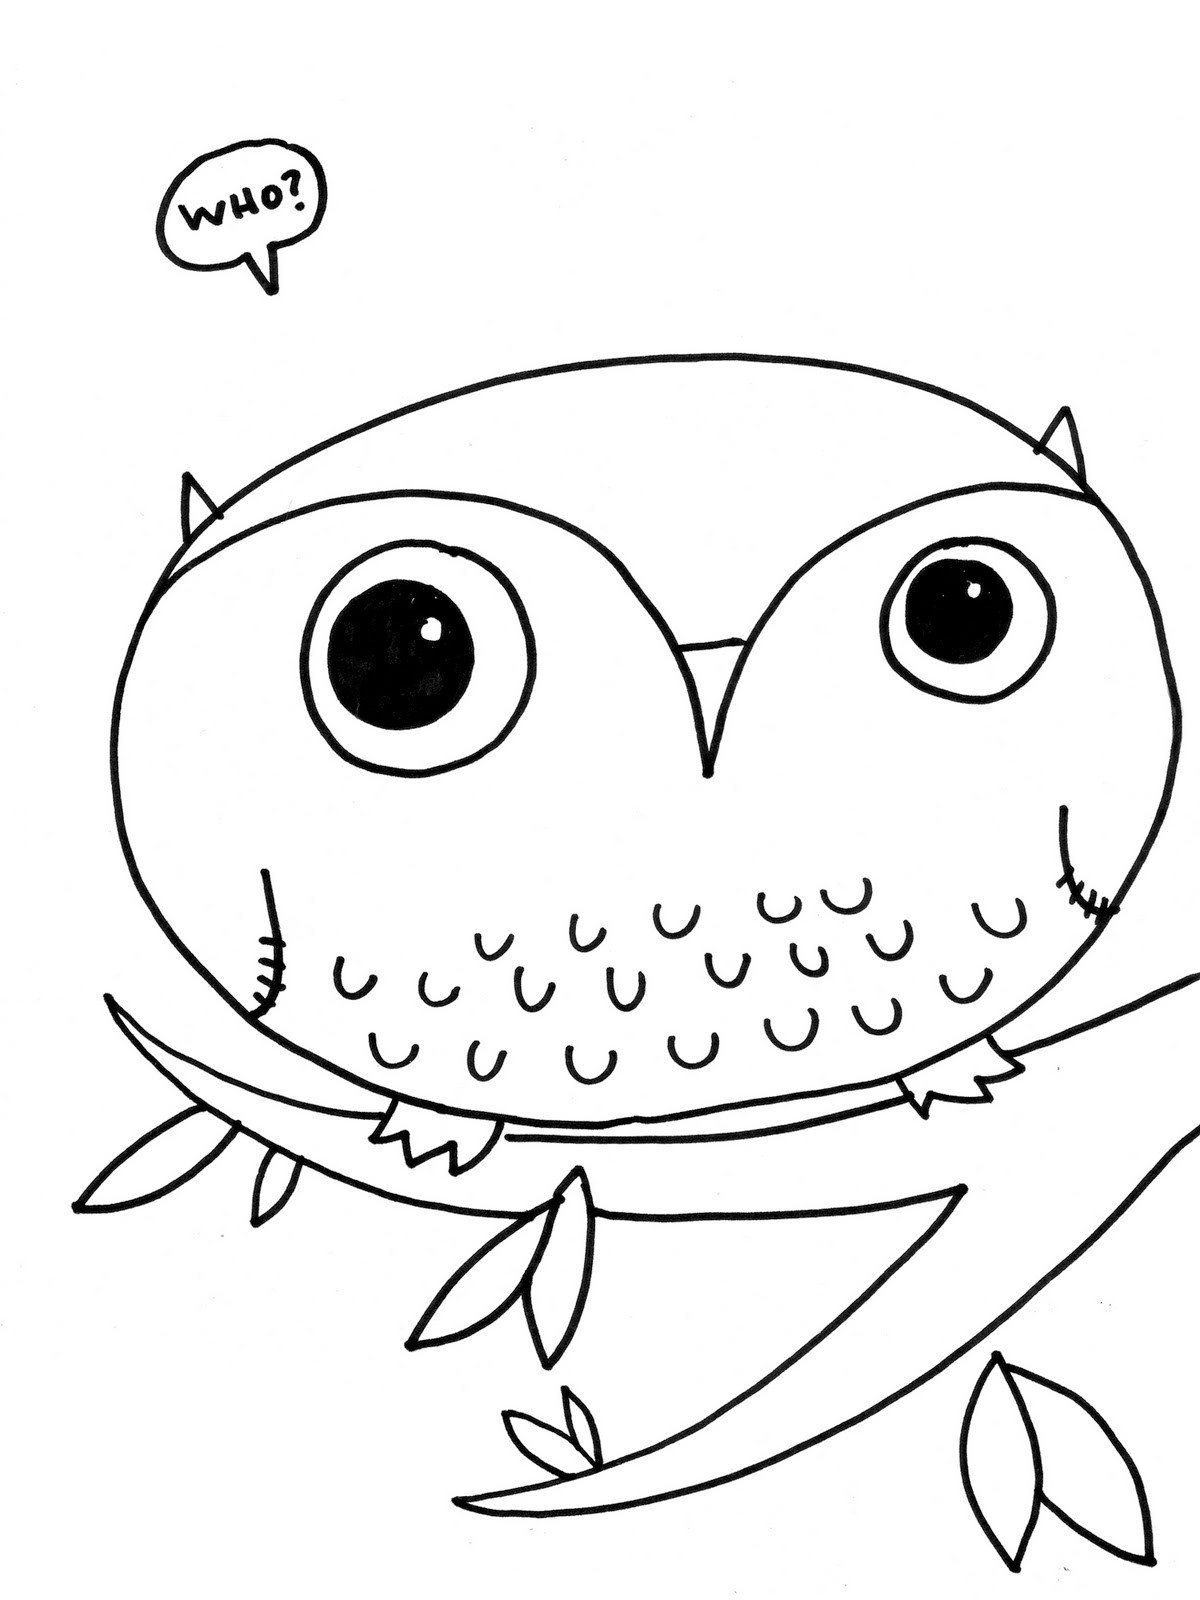 Cute Baby Owl Coloring Pages
 Easy Cute Owl Drawing at GetDrawings